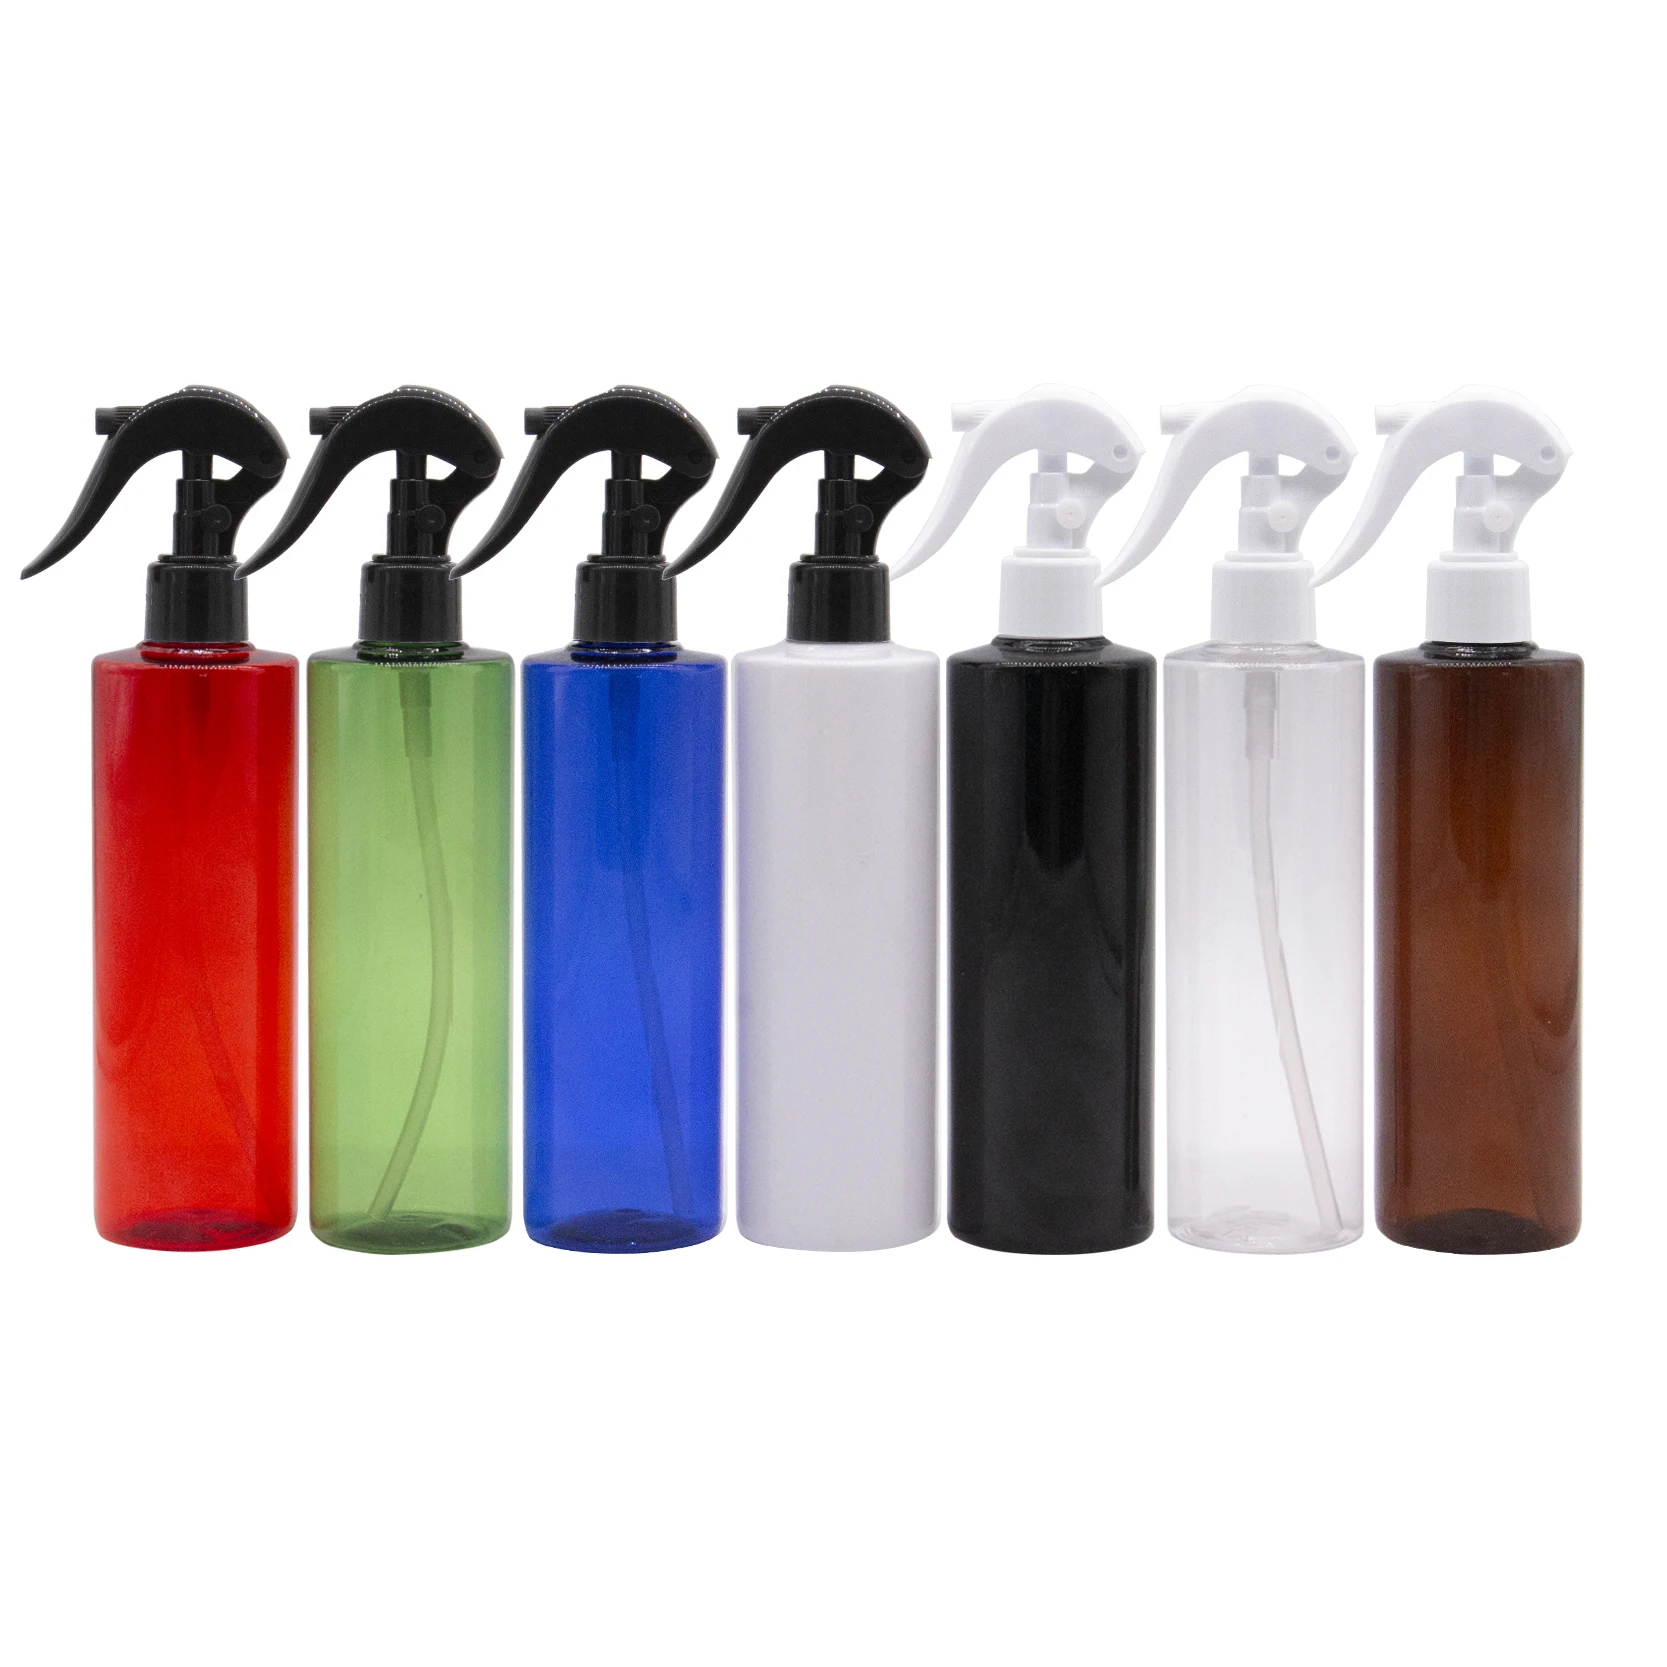 250ml Empty Plastic Cosmetic Containers Mouse Trigger Spray Pump ,Makeup White Black Bottle Trigger Mist Sprayer 25pc/lot